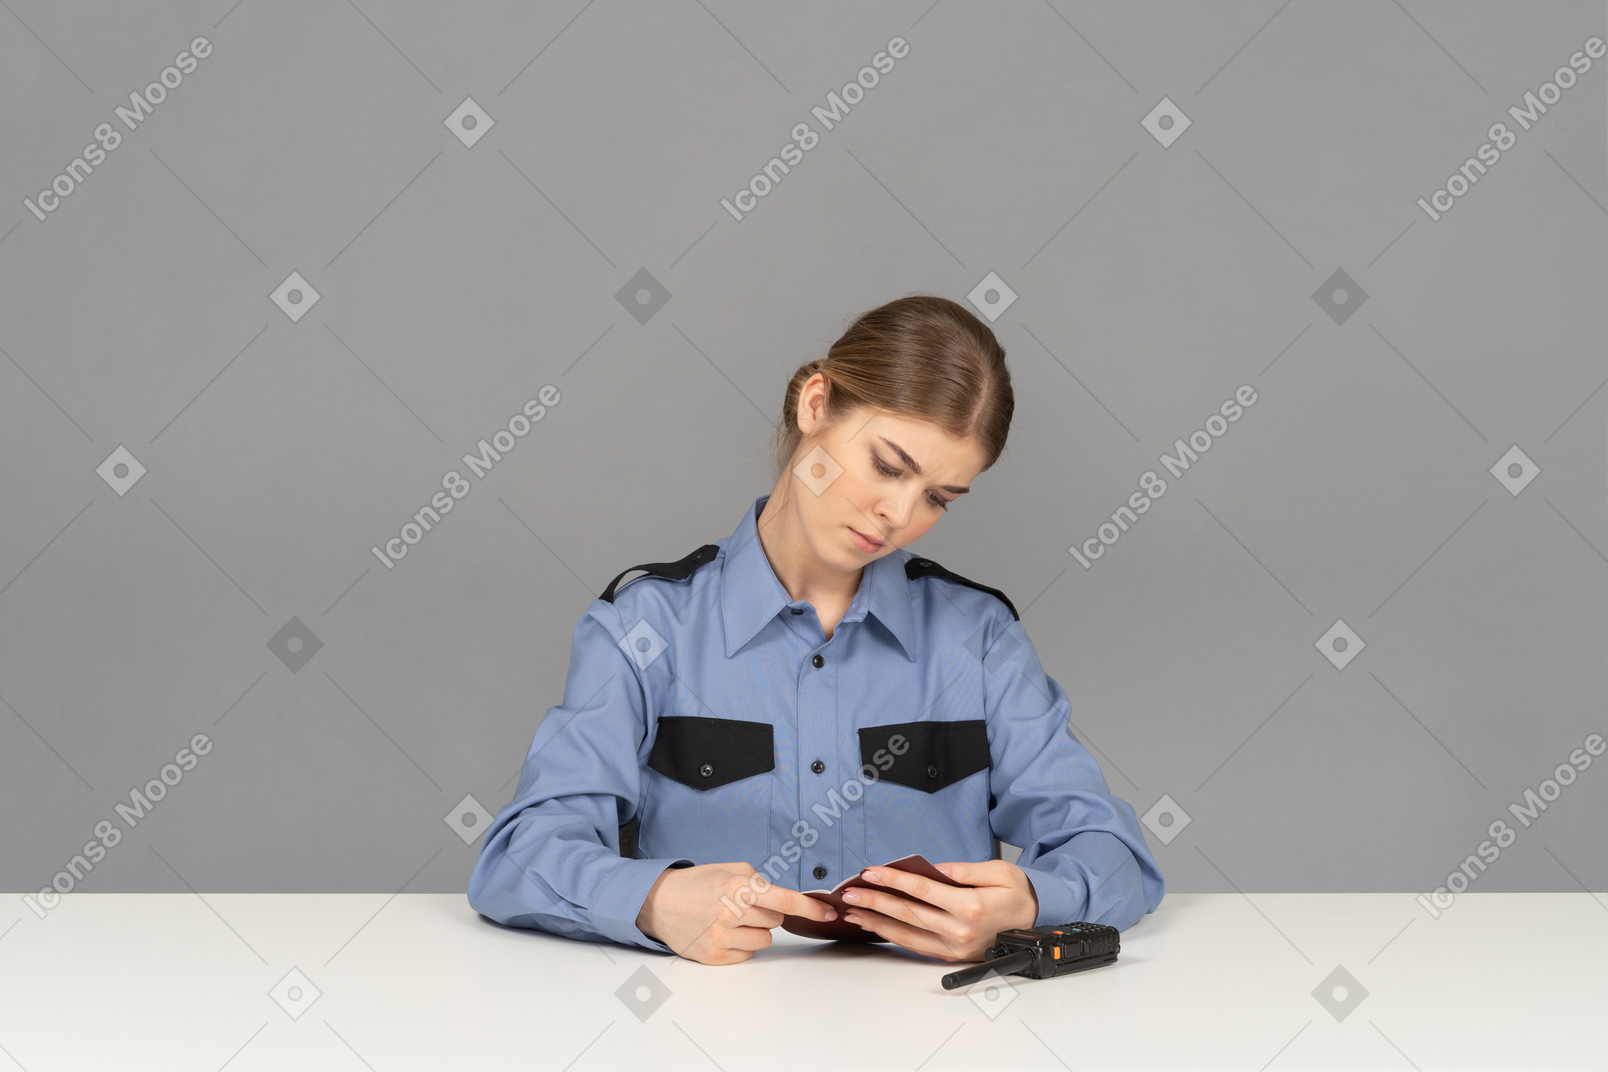 A young female security guard checking documents